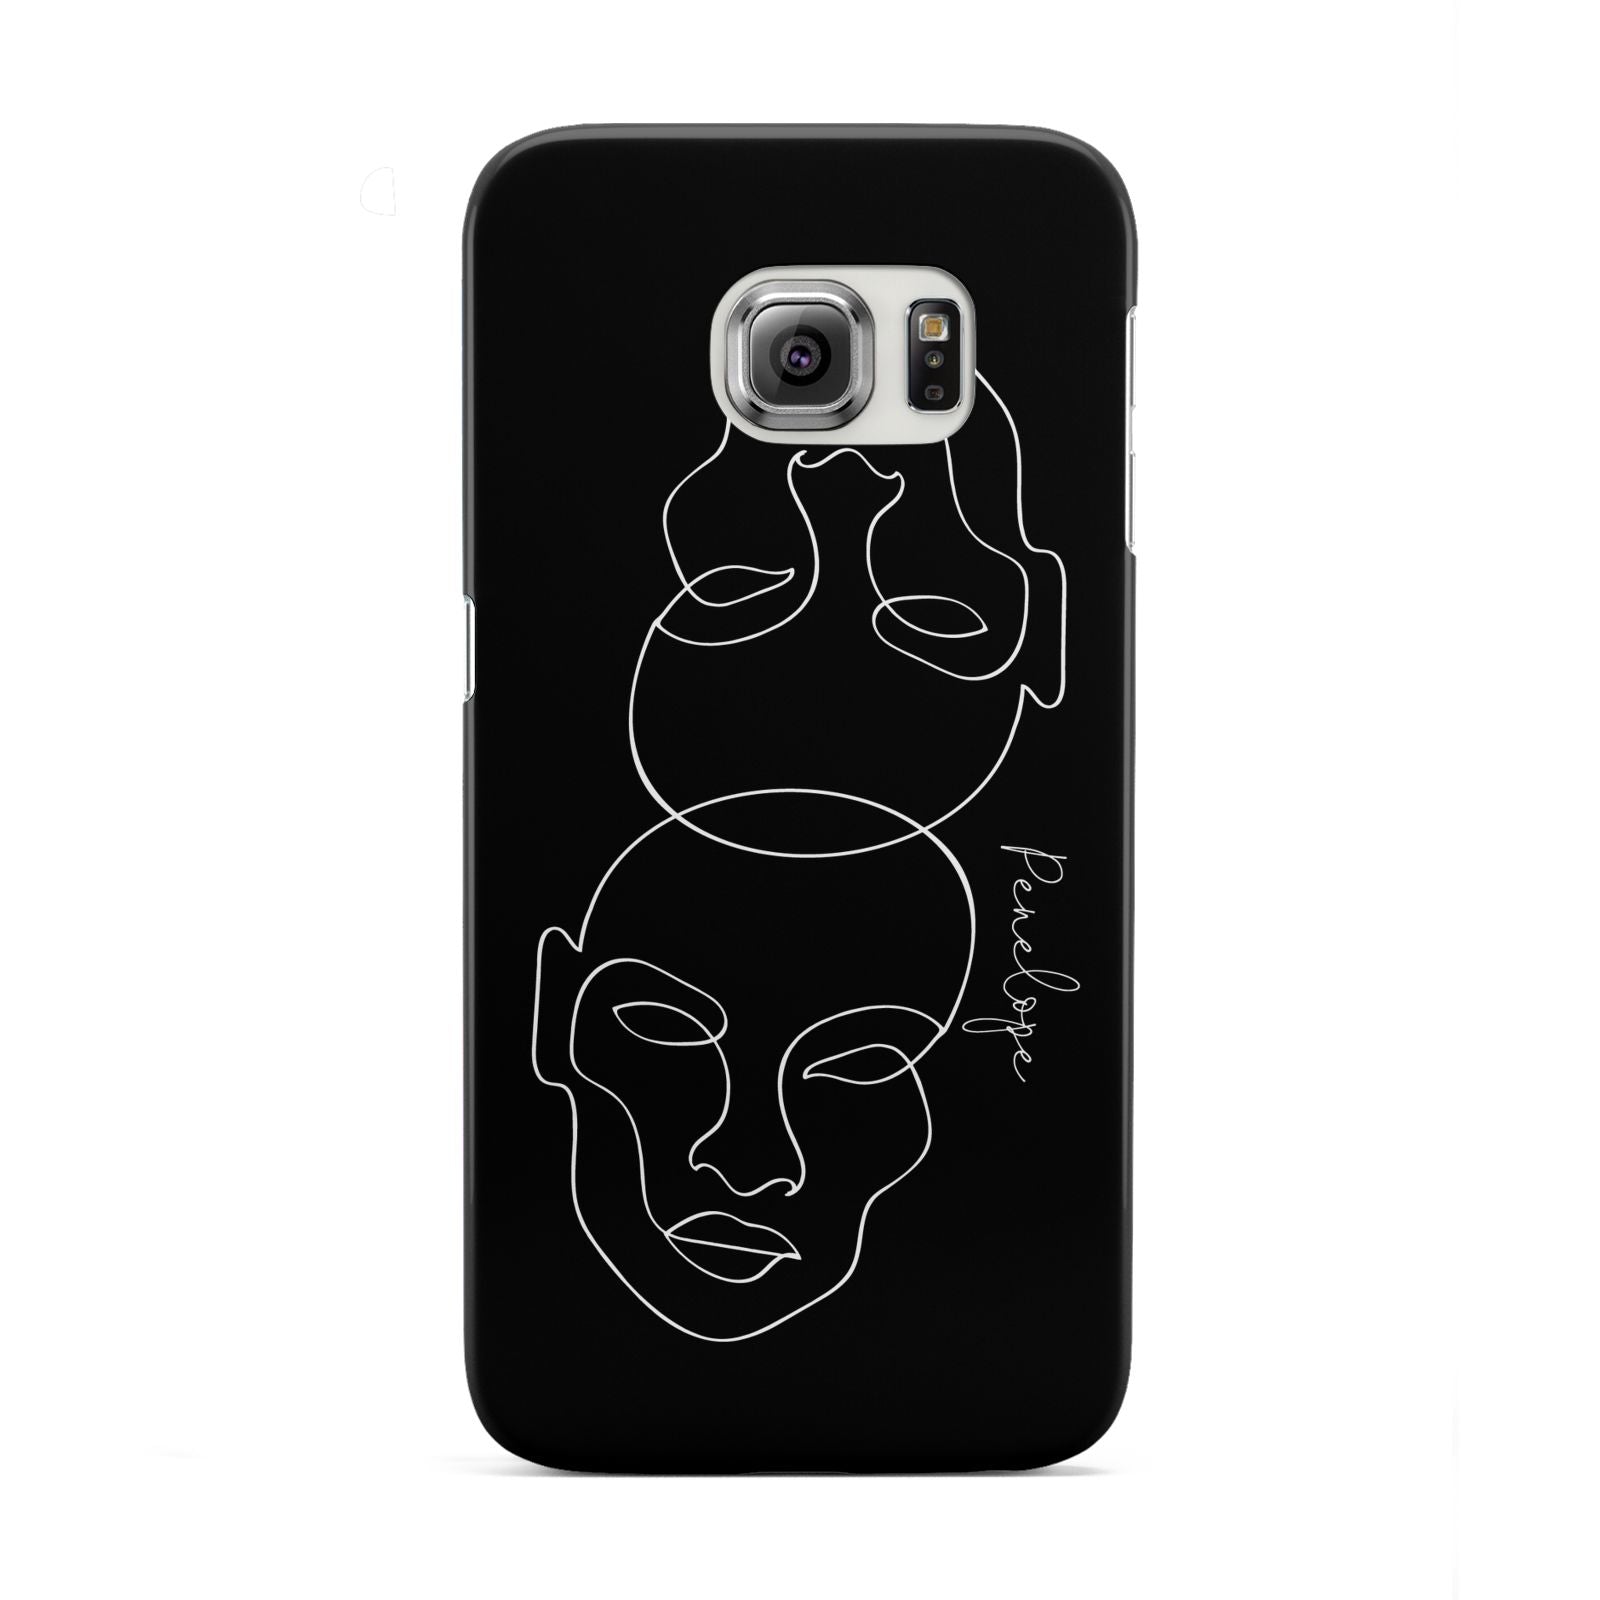 Personalised Abstract Line Art Samsung Galaxy S6 Edge Case